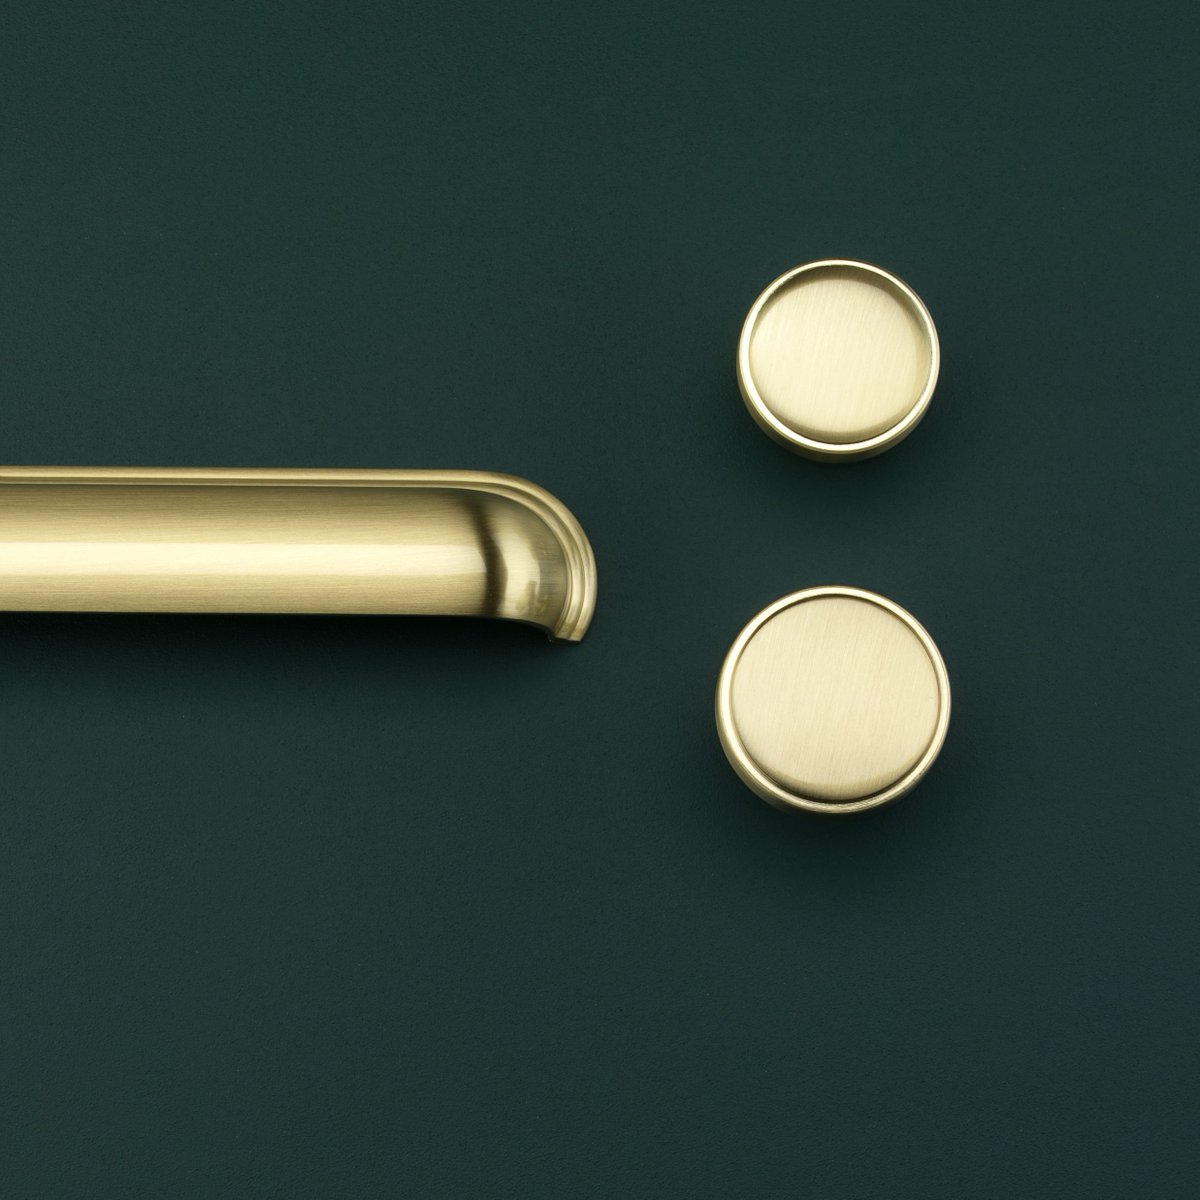 An instant classic, and one of our most popular ranges, the Calgary combines elegant curves, bold styling and perfected detailing to create a masterpiece. #exquisitehardware #handle #knob #kitchen #kitchengoals #cuphandle crofts.co.uk/product/calgar…